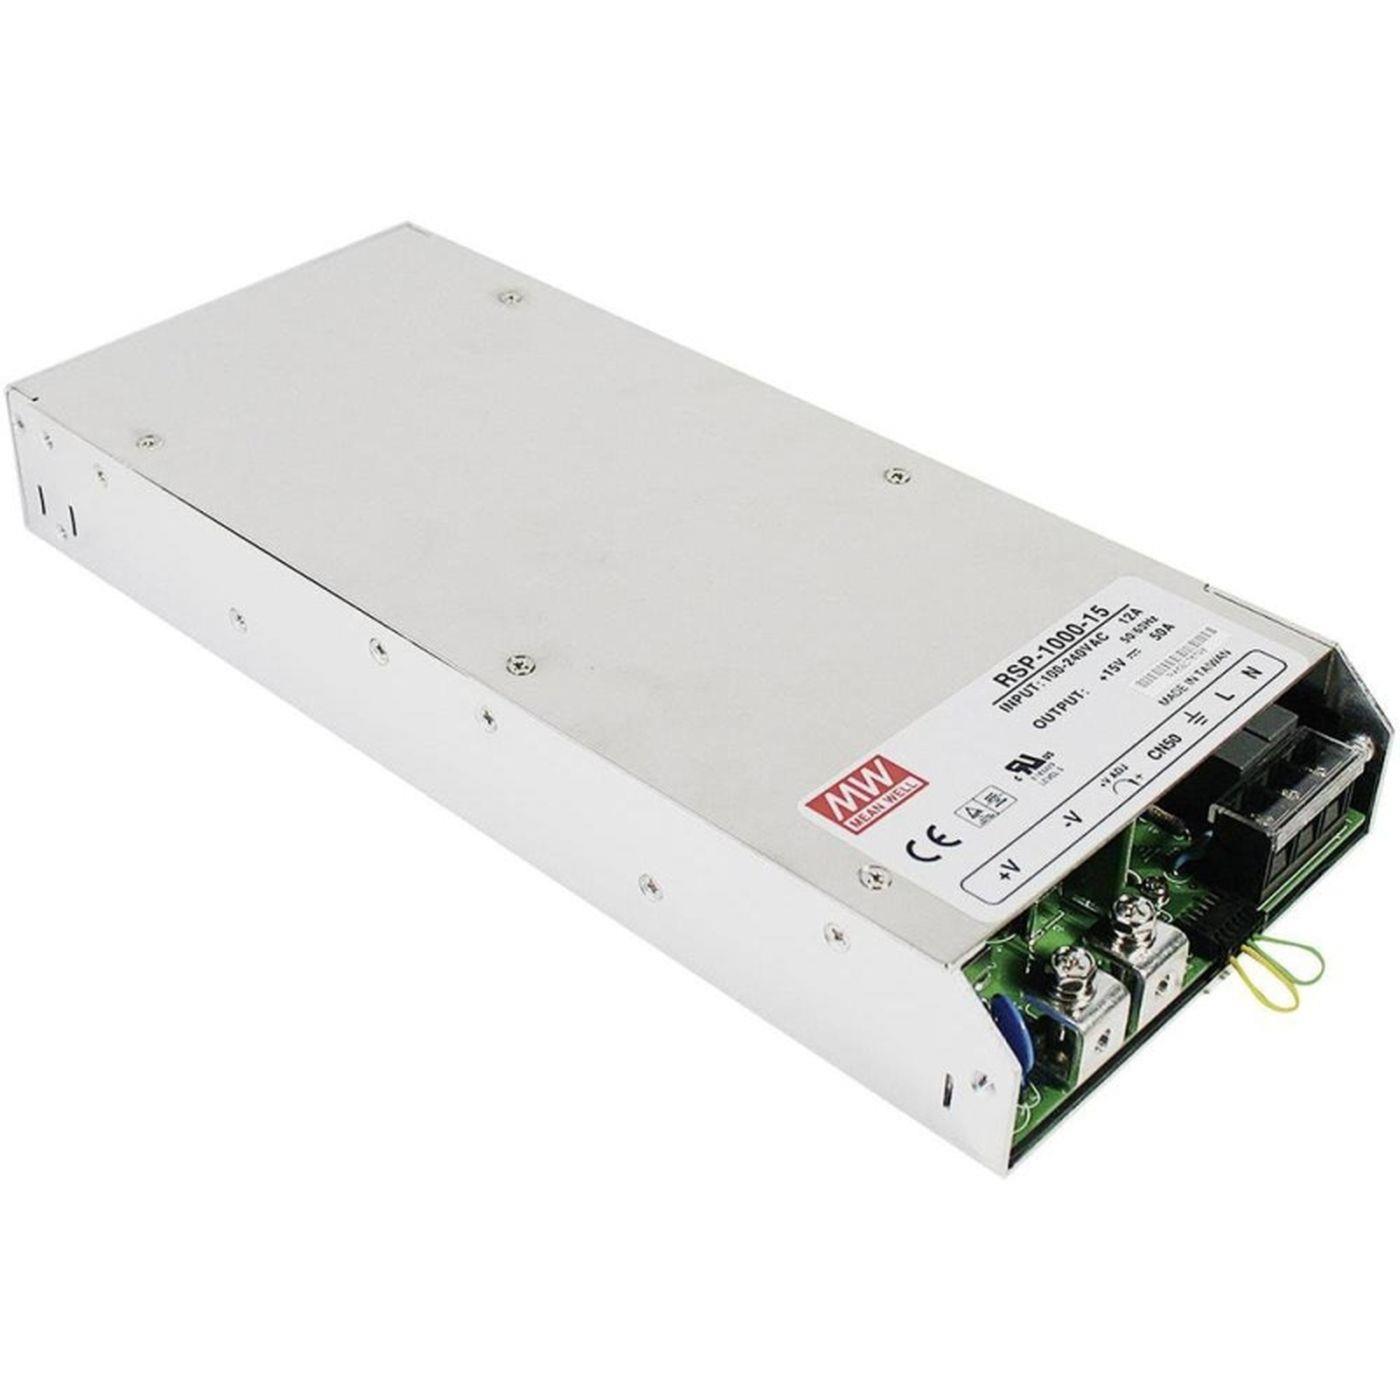 RSP-1000-12 720W 12V 60A Industrial power supply